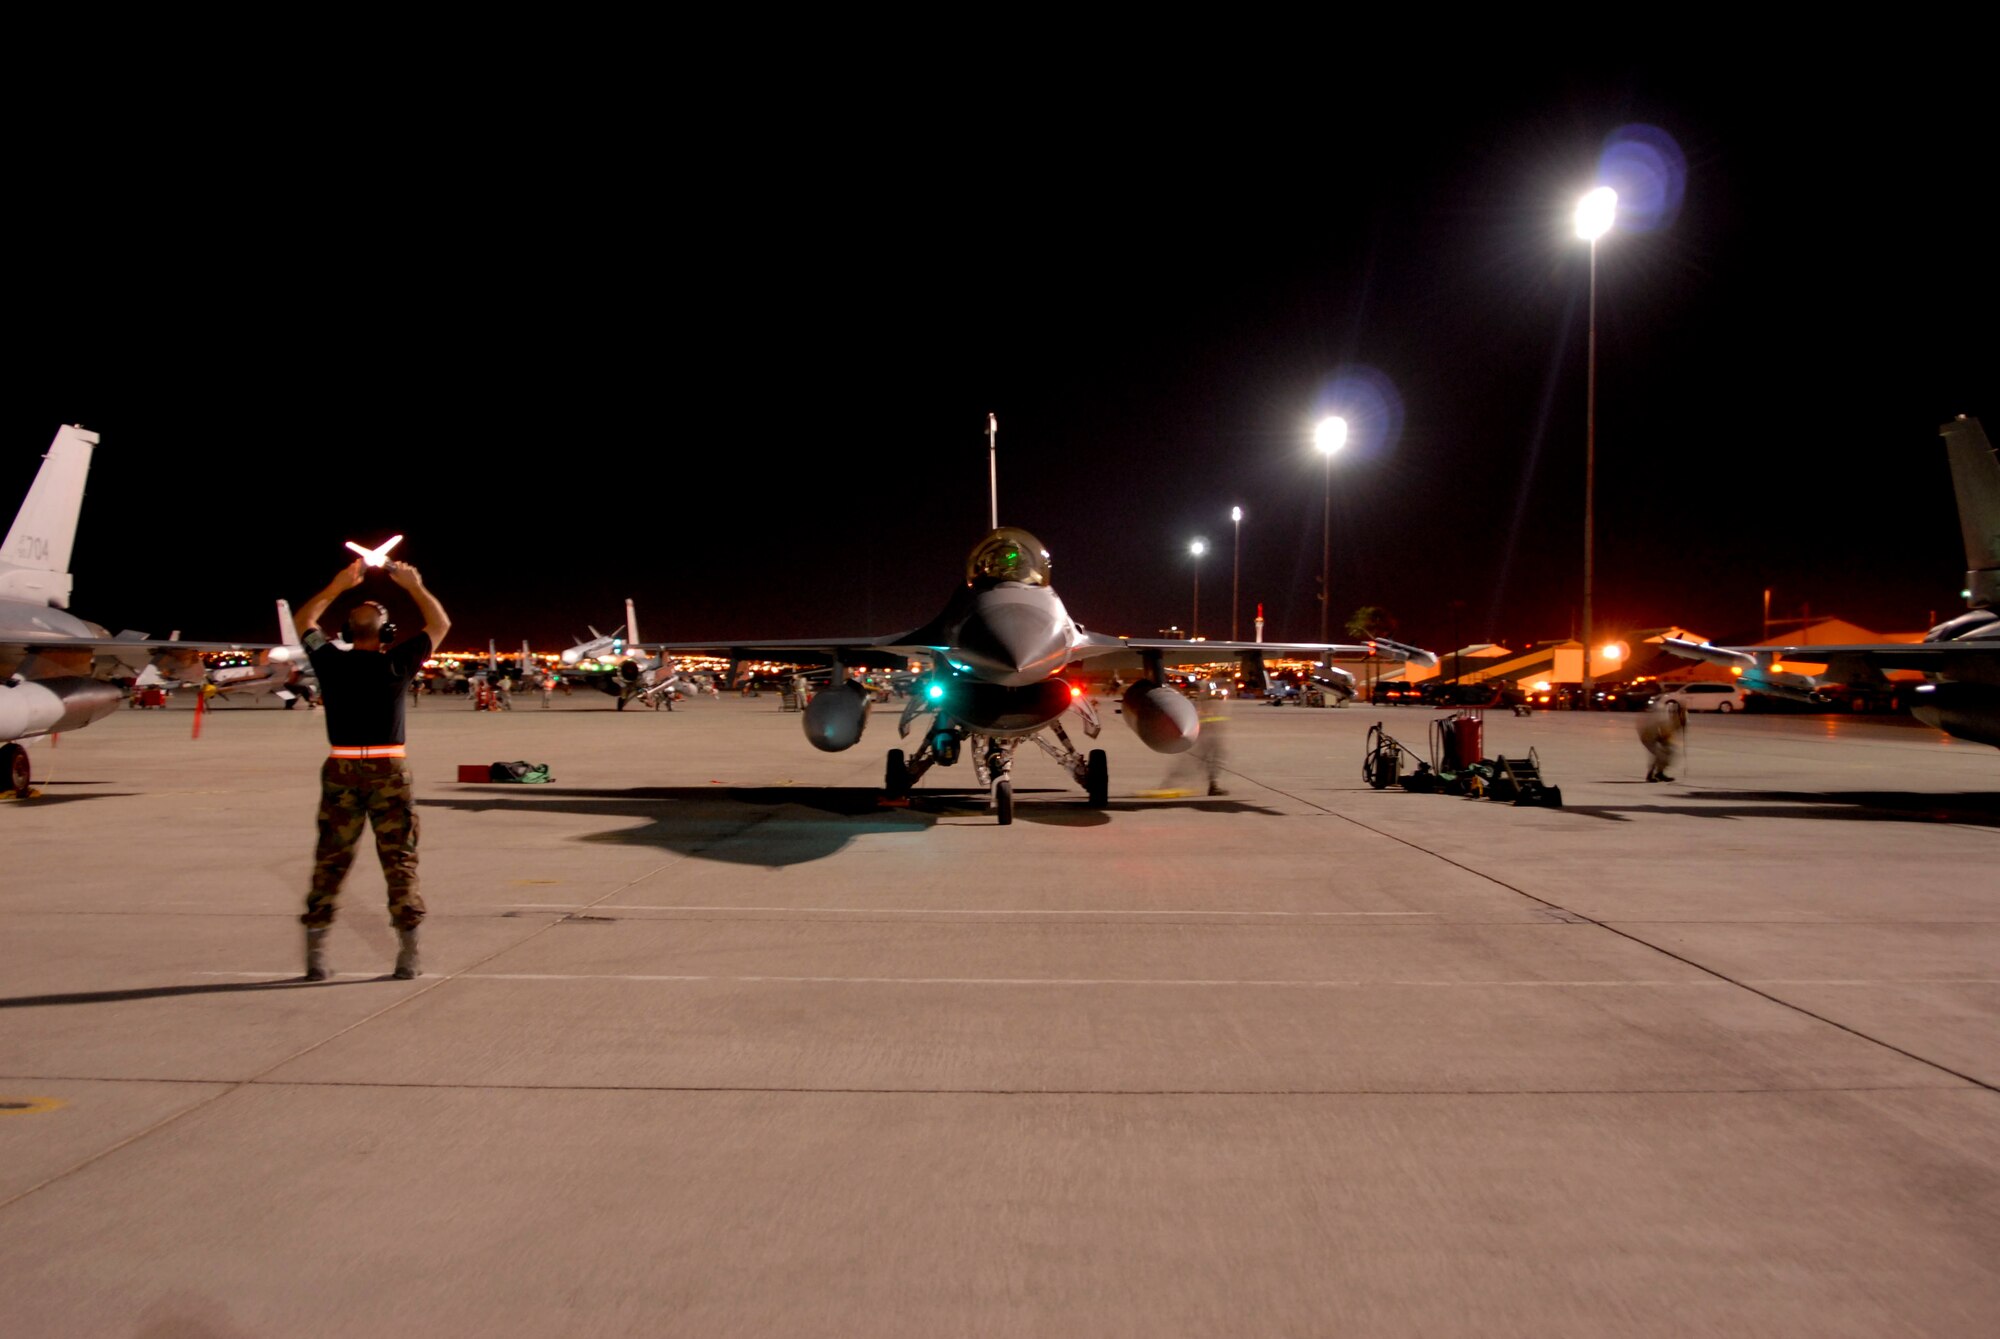 U.S. Air Force Airmen with the 180th Fighter Wing, Ohio Air National Guard are deployed to Nellis Air Force Base, Nev., July 12, 2009, to participate in a Red Flag exercise. Red Flag exercises are designed to provide the most realistic training environments for United States and allied air forces. (U.S. Air Force photo by Tech. Sgt. Beth Holliker/Released)